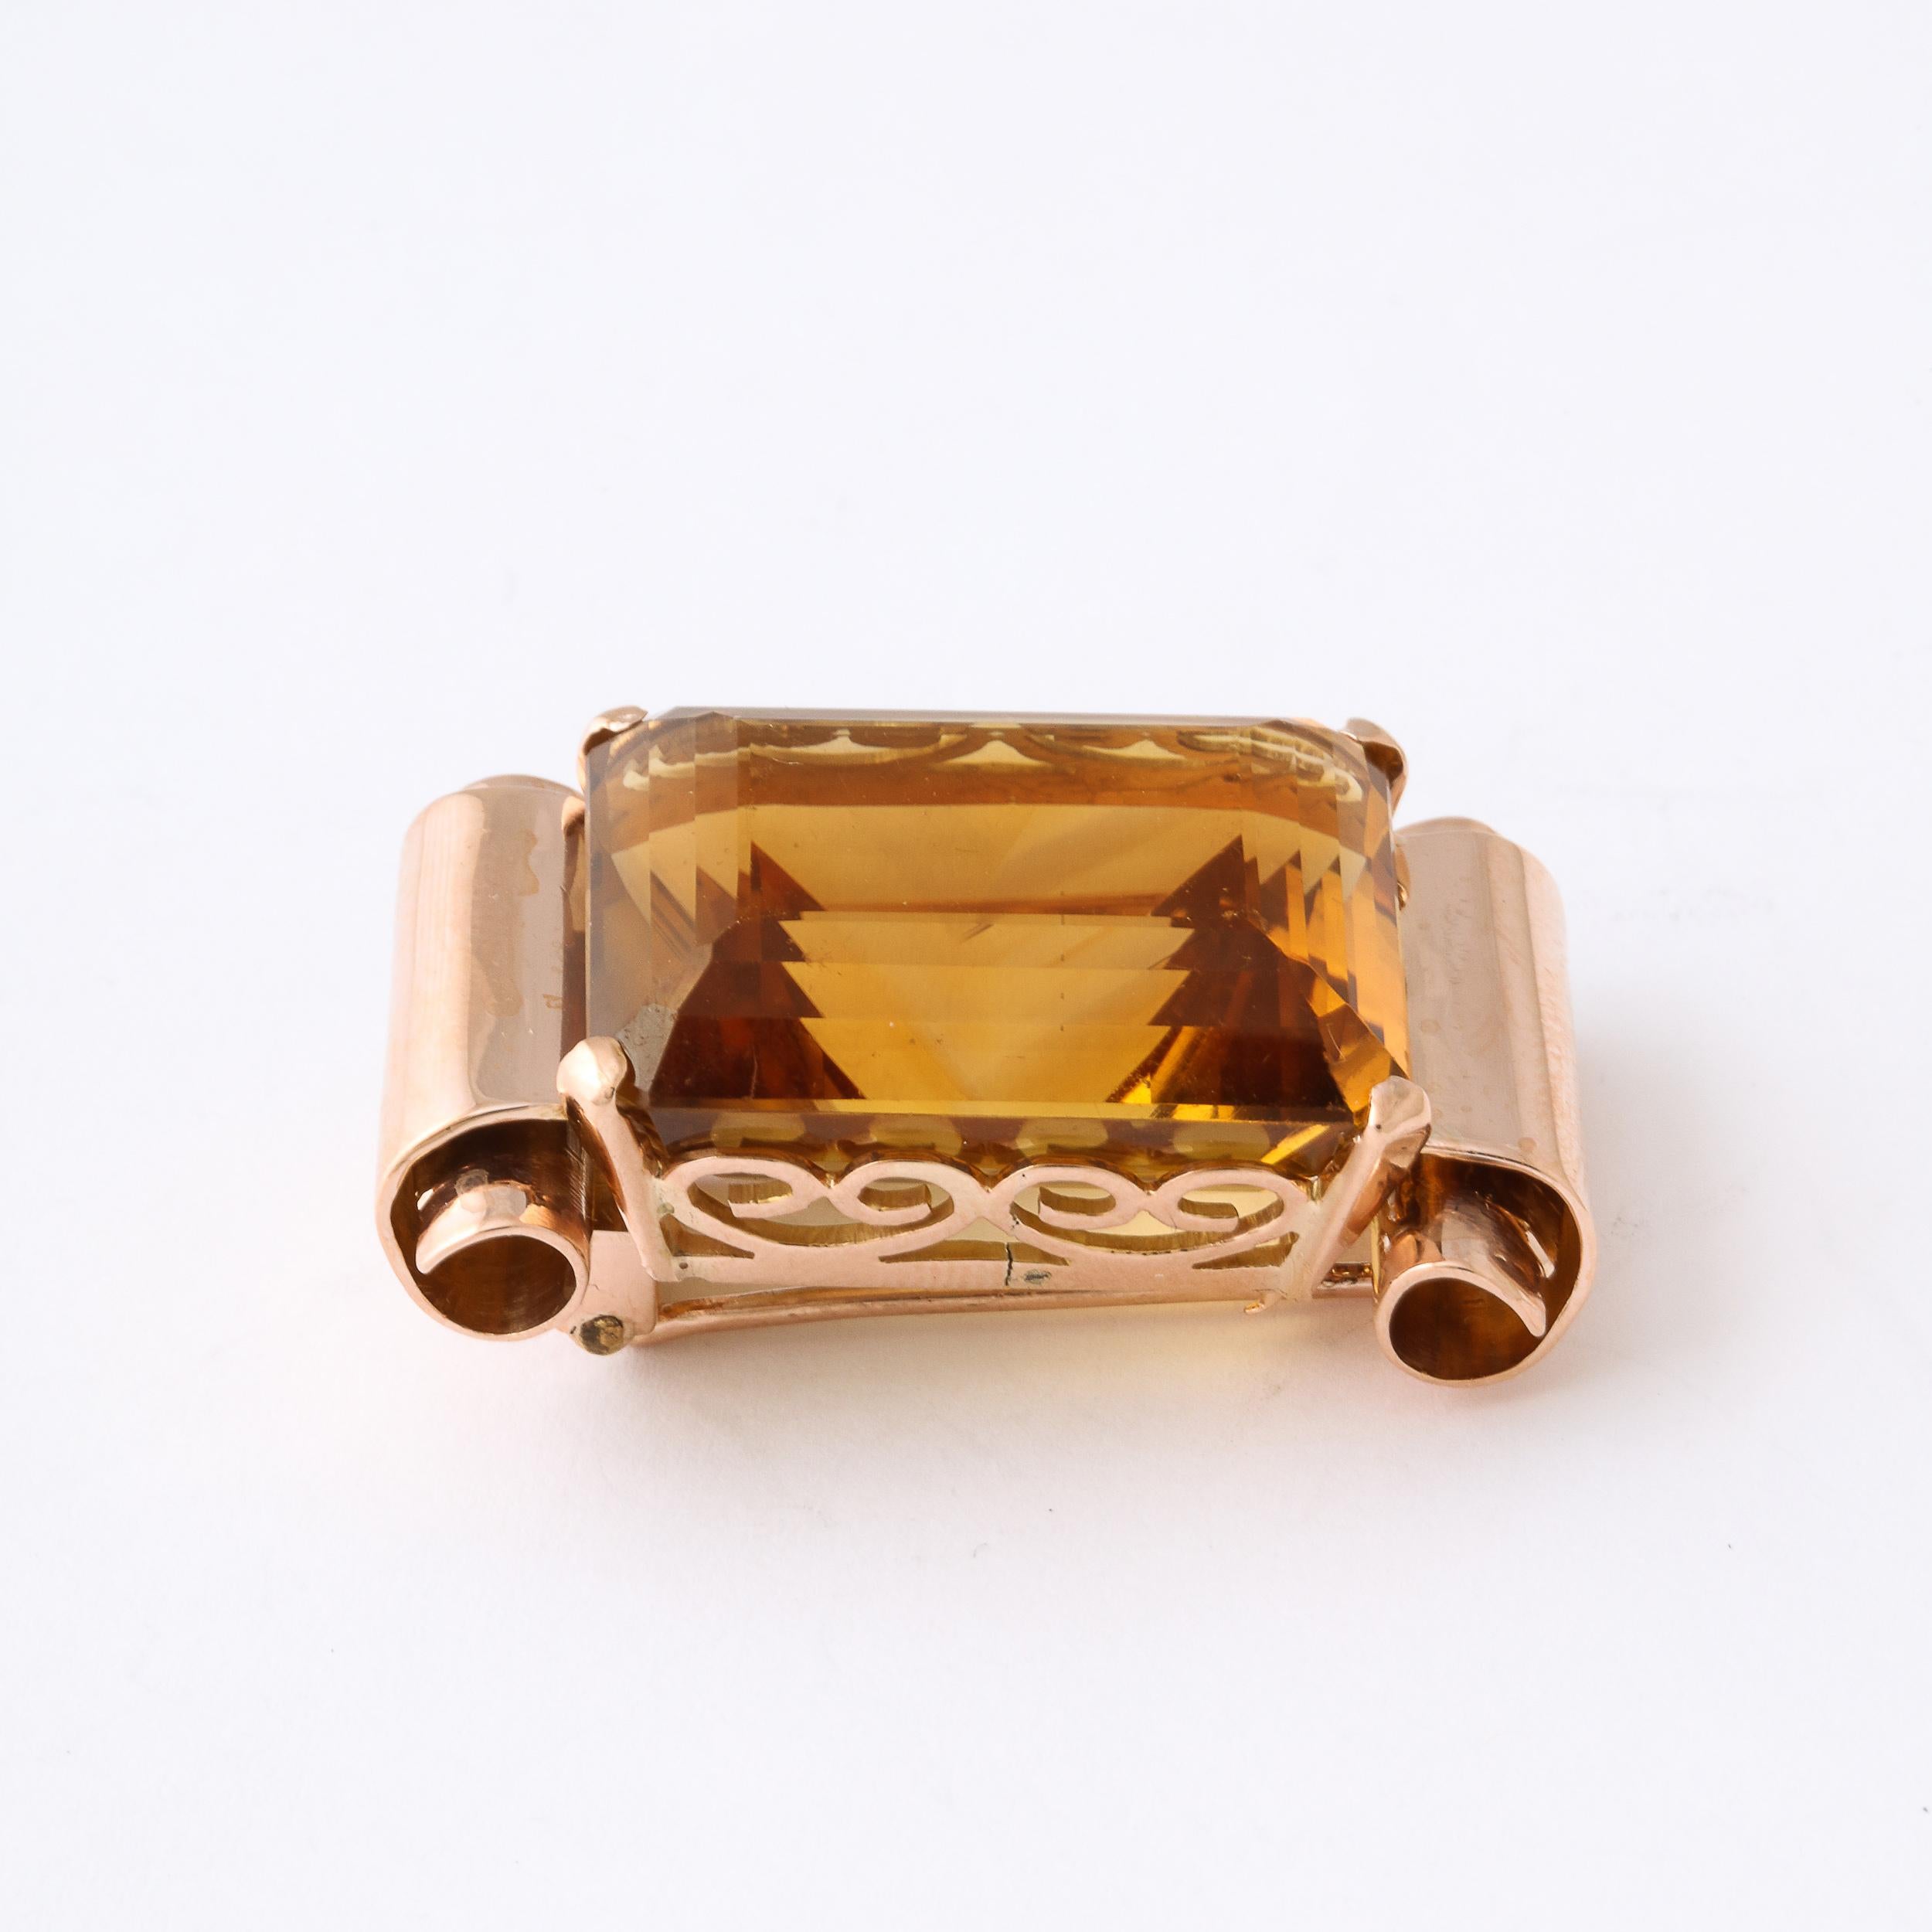 This Bold and glamorous brooch features a 40 carat emerald cut citrine set in a 18k rose gold scrolling mount. It is fitted for a brooch and also a chain can be looped through to make it a pendant.  This Brooch is very 1940s Hollywood at its best.